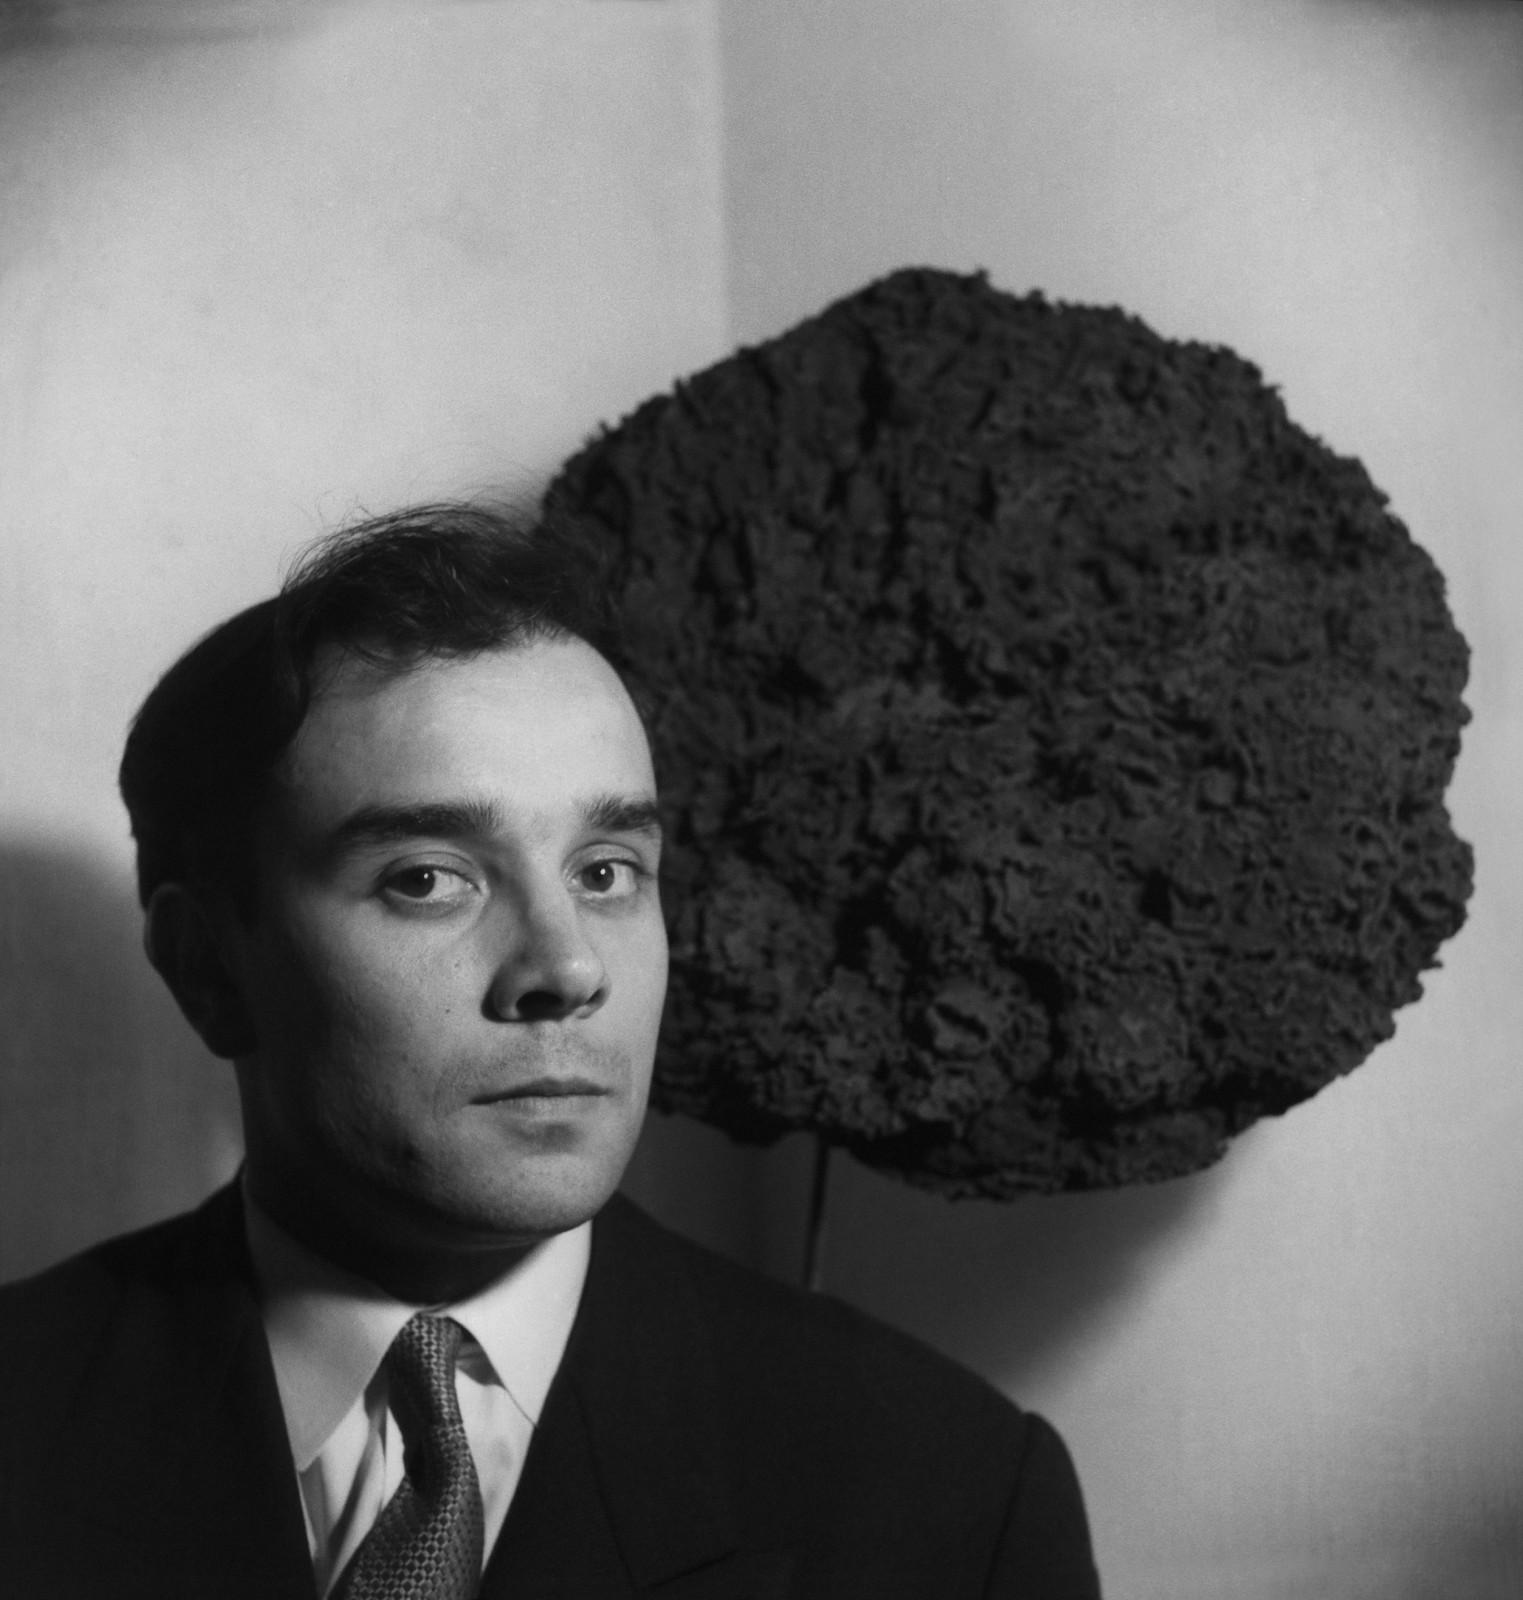 Yves Klein during the opening of the exhibition "Monochrome Propositions of Yves Klein », Gallery One, London, 1957